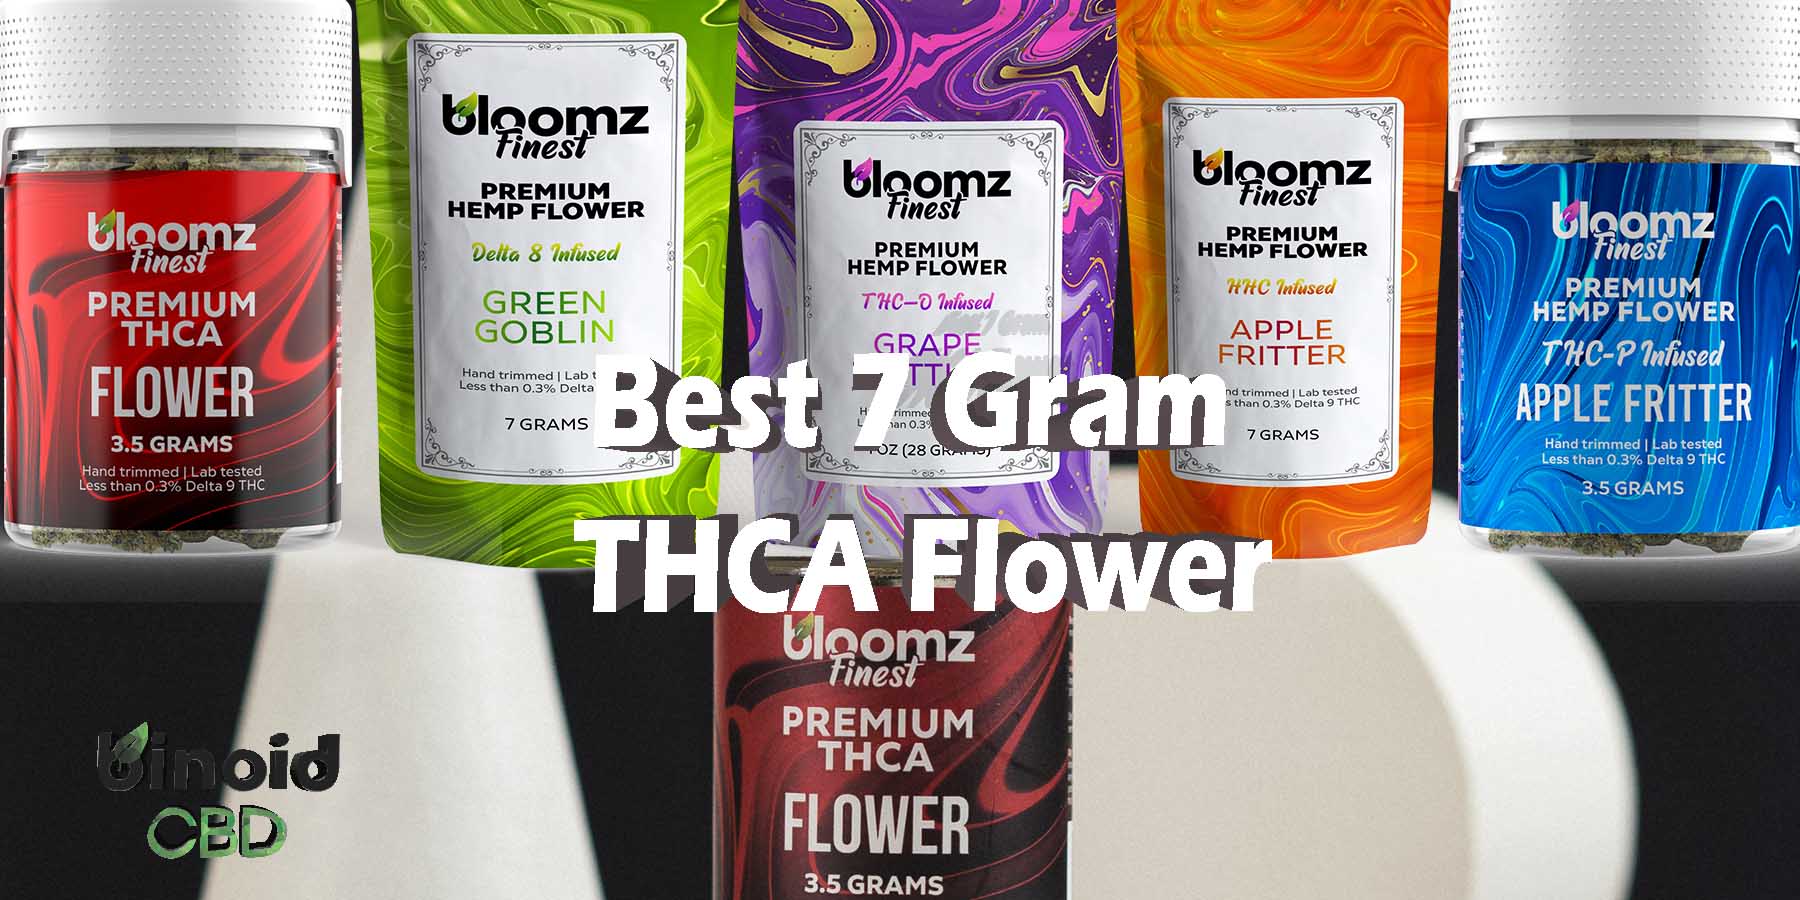 Best 7 Gram THCA Flower Pre Rolls Where To Get Near Me Best Place Lowest Price Coupon Discount Strongest Brand Bloomz Binoid